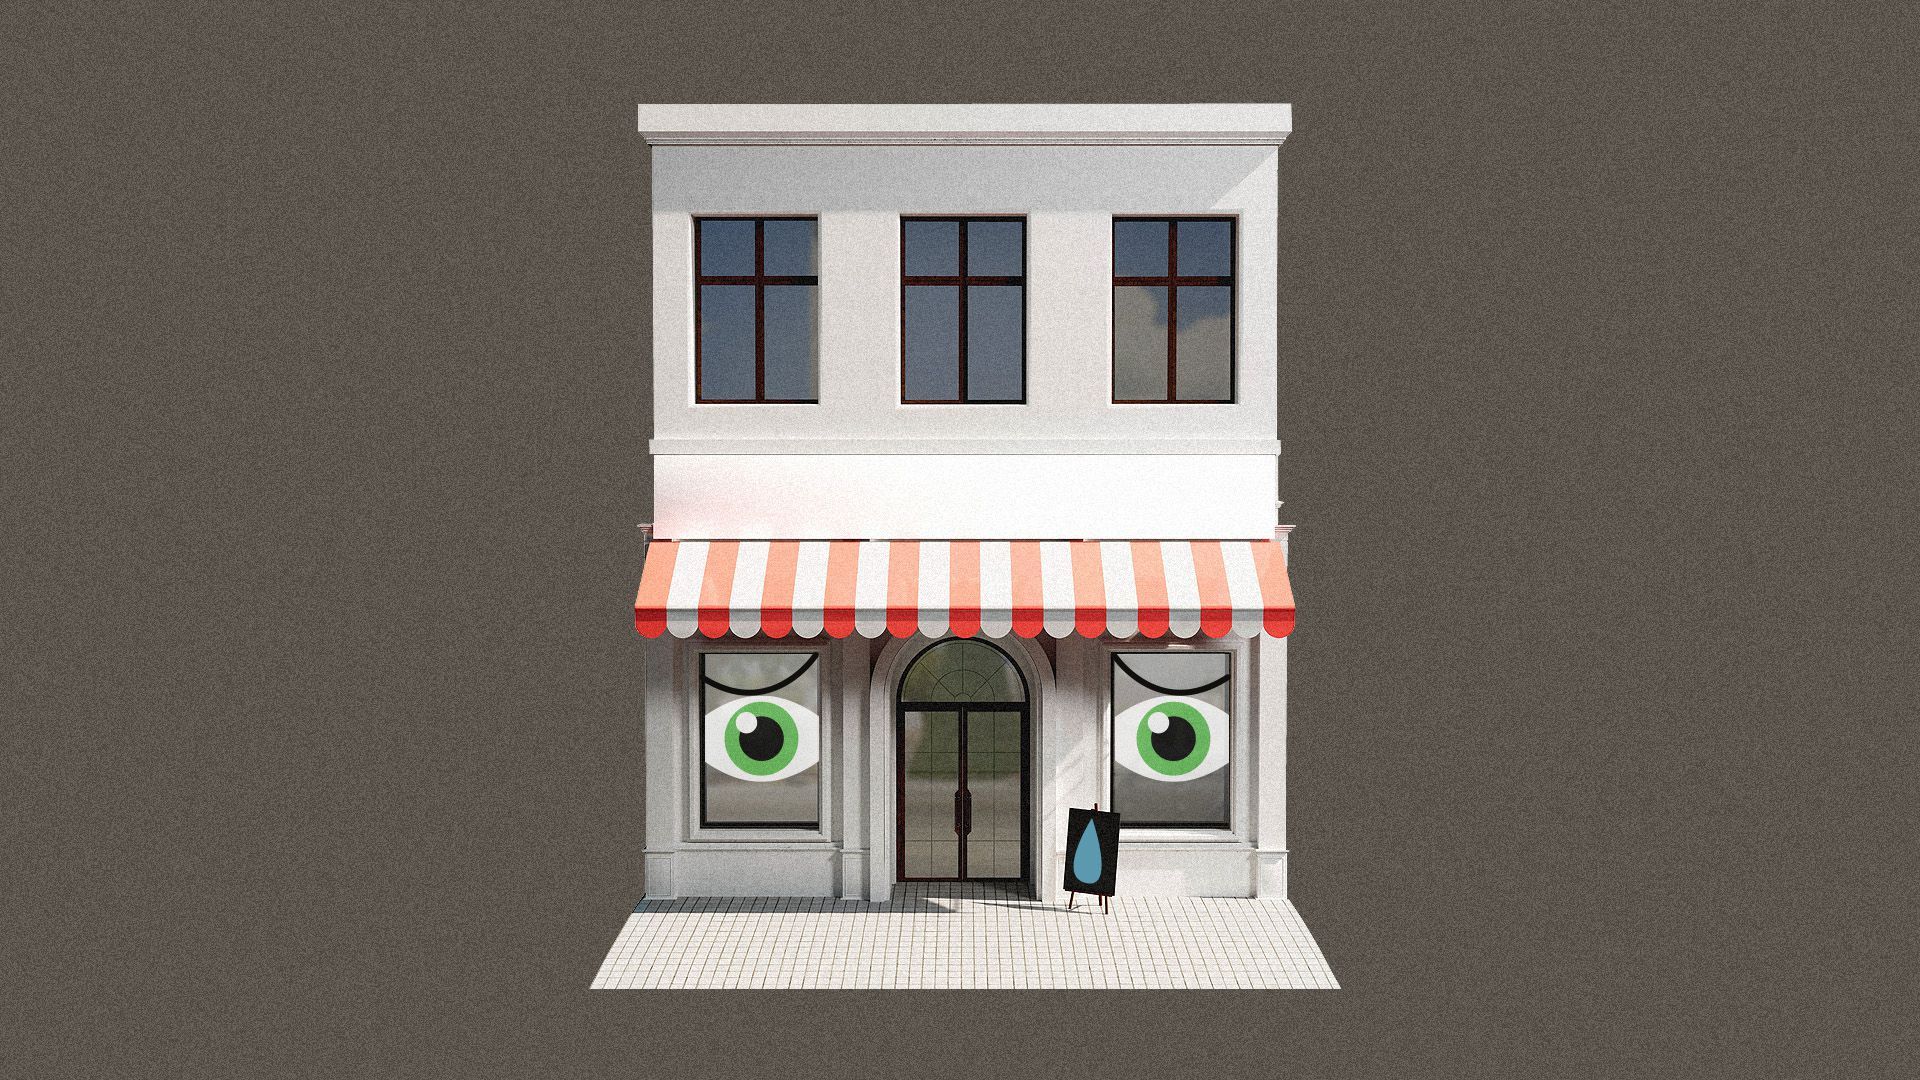 Illustration of a storefront with worried eyes in the windows